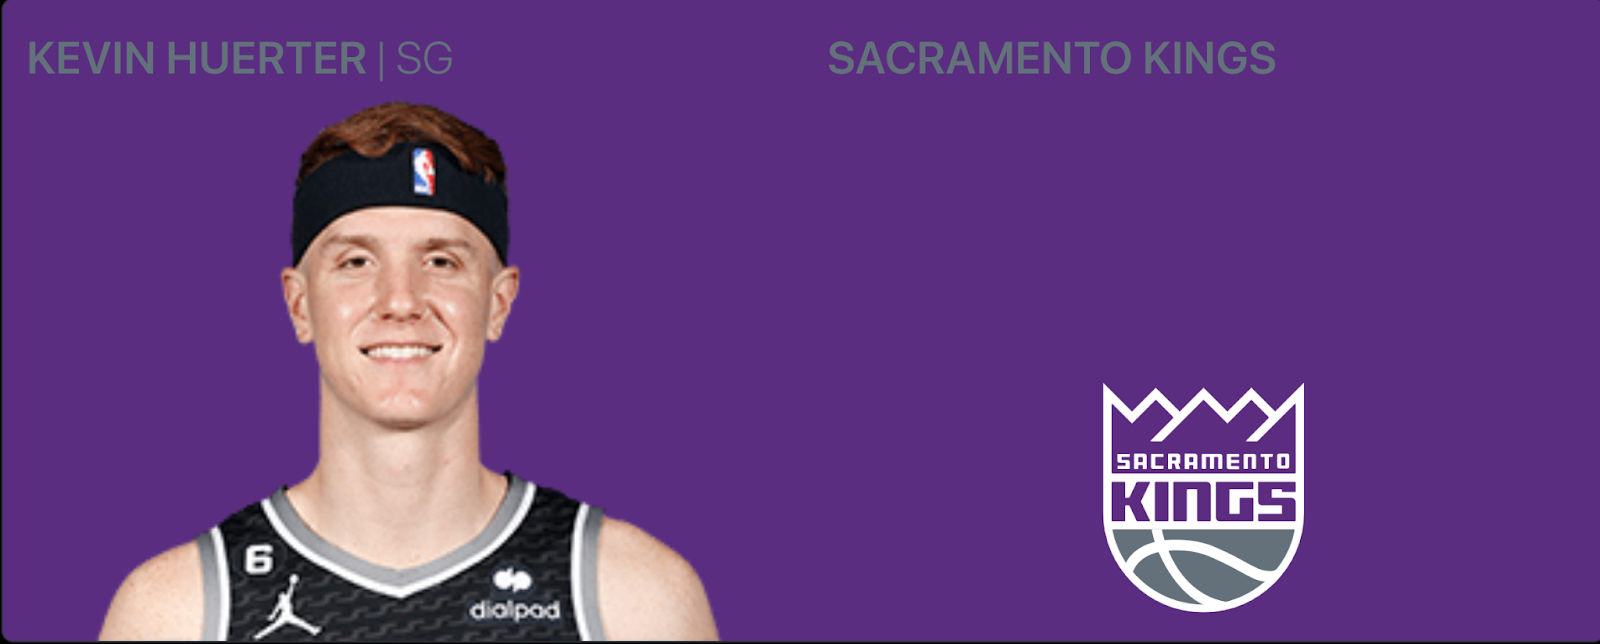 Sacramento Kings: 3 players who are underrated in NBA 2K22